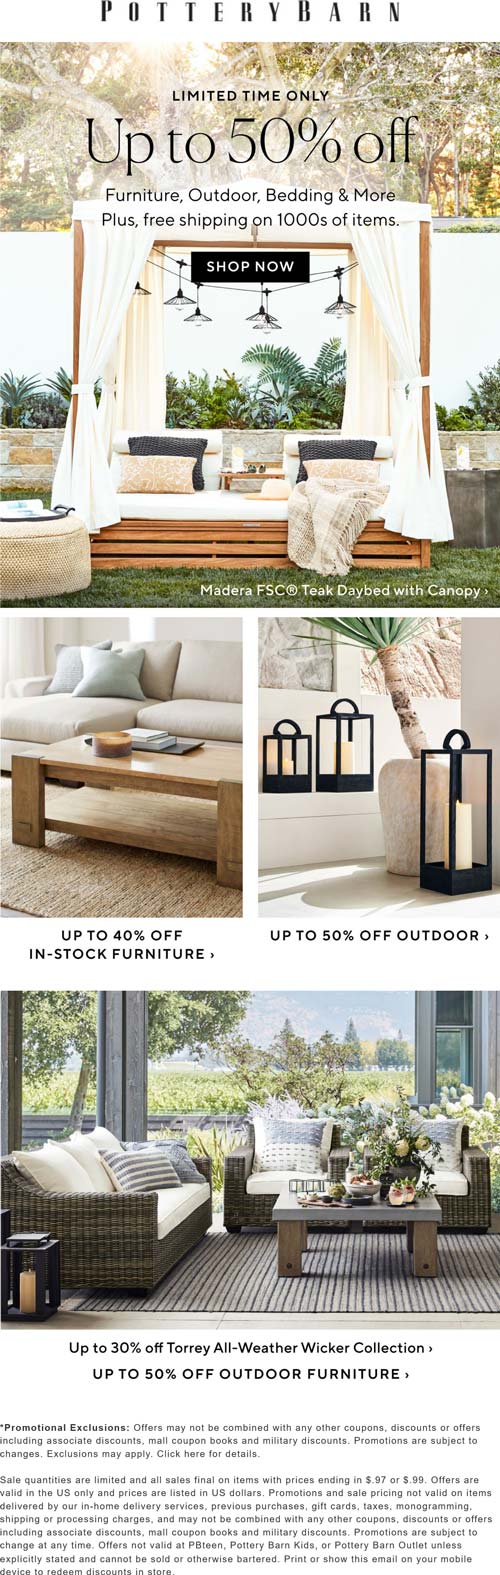 Pottery Barn stores Coupon  Various furniture, outdoor & bedding is 50% off at Pottery Barn #potterybarn 